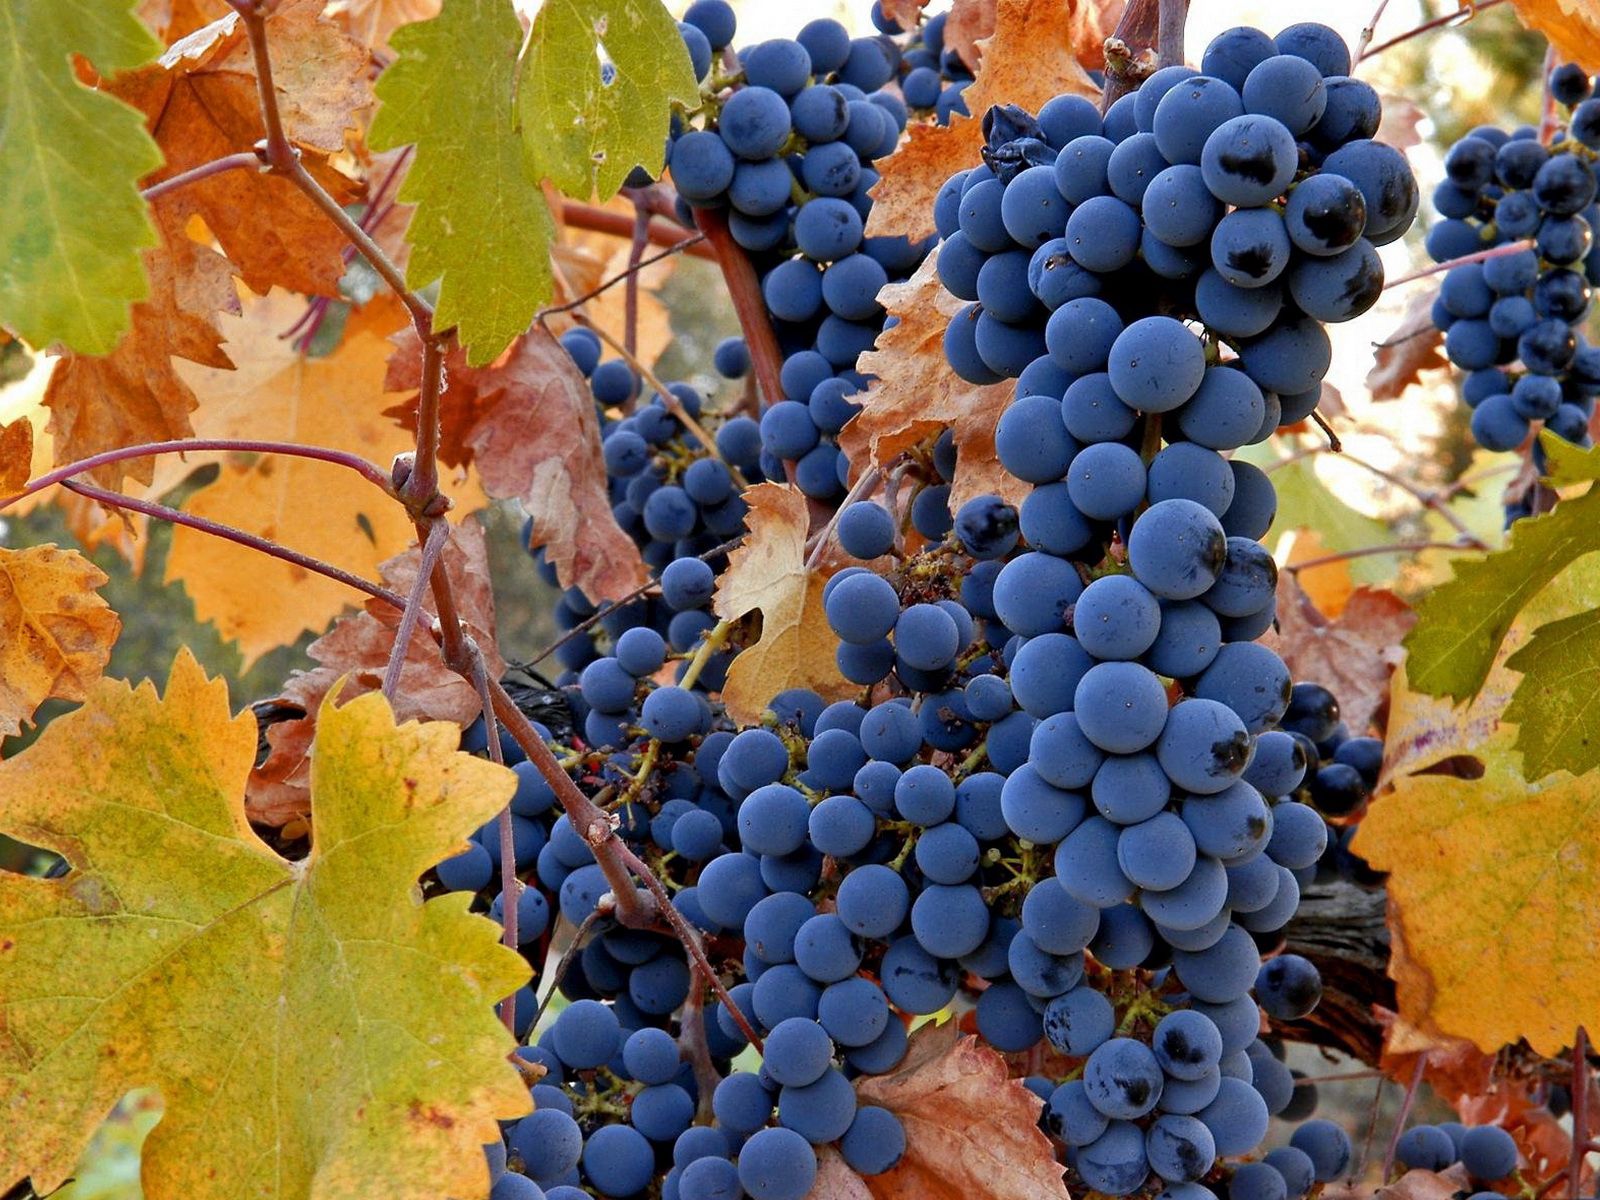 fruits, autumn, food, leaves, vine, grapes, bunches, clusters, harvest